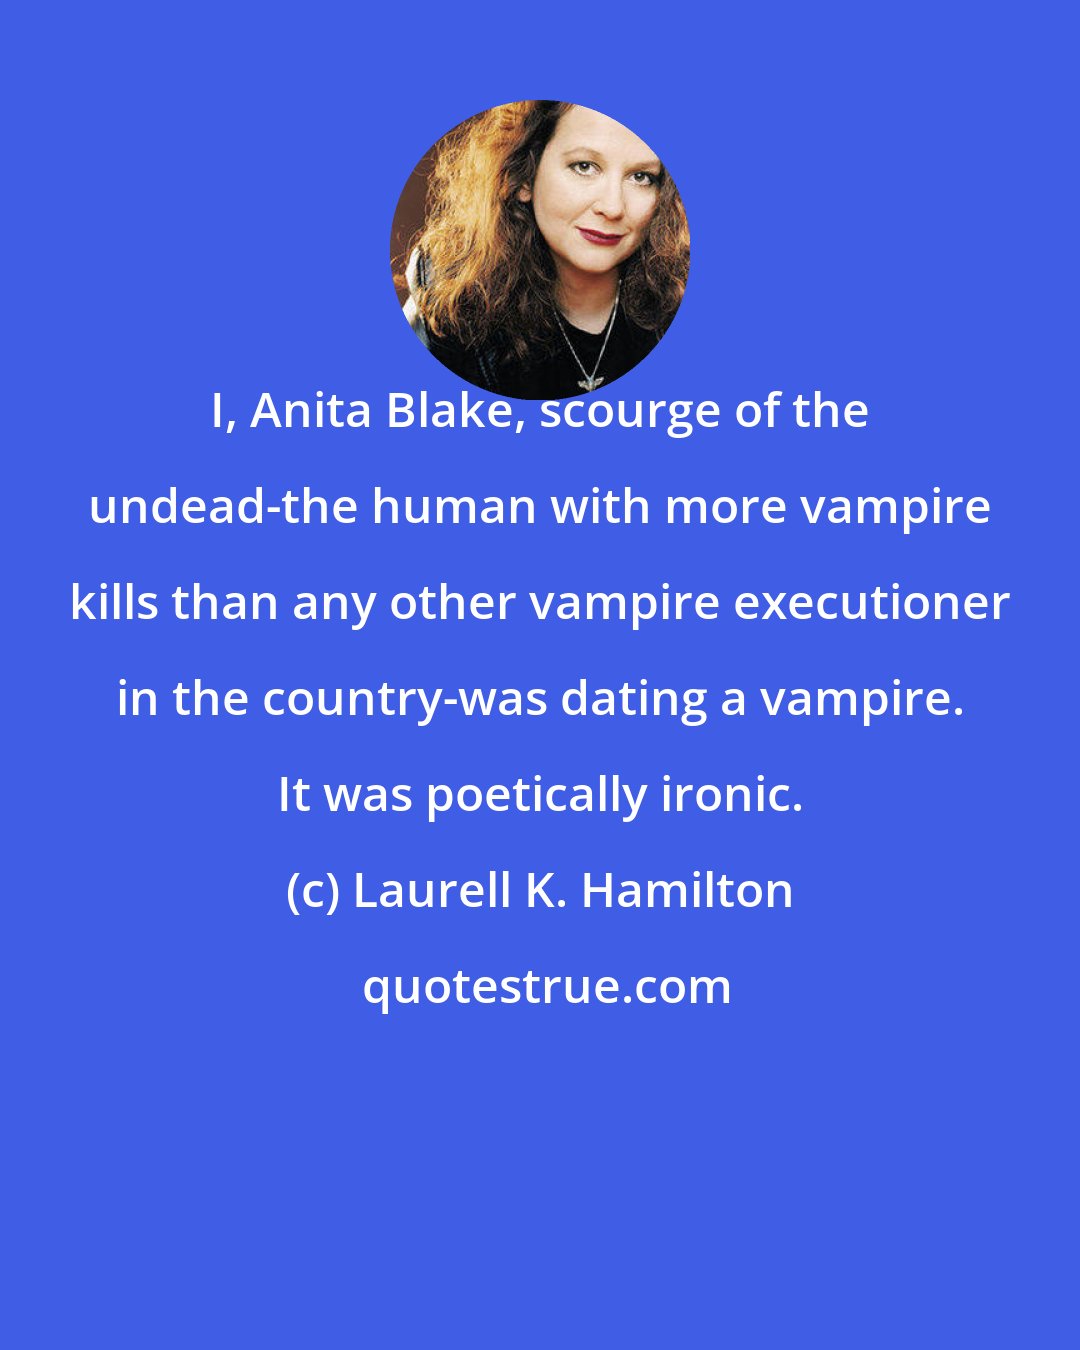 Laurell K. Hamilton: I, Anita Blake, scourge of the undead-the human with more vampire kills than any other vampire executioner in the country-was dating a vampire. It was poetically ironic.